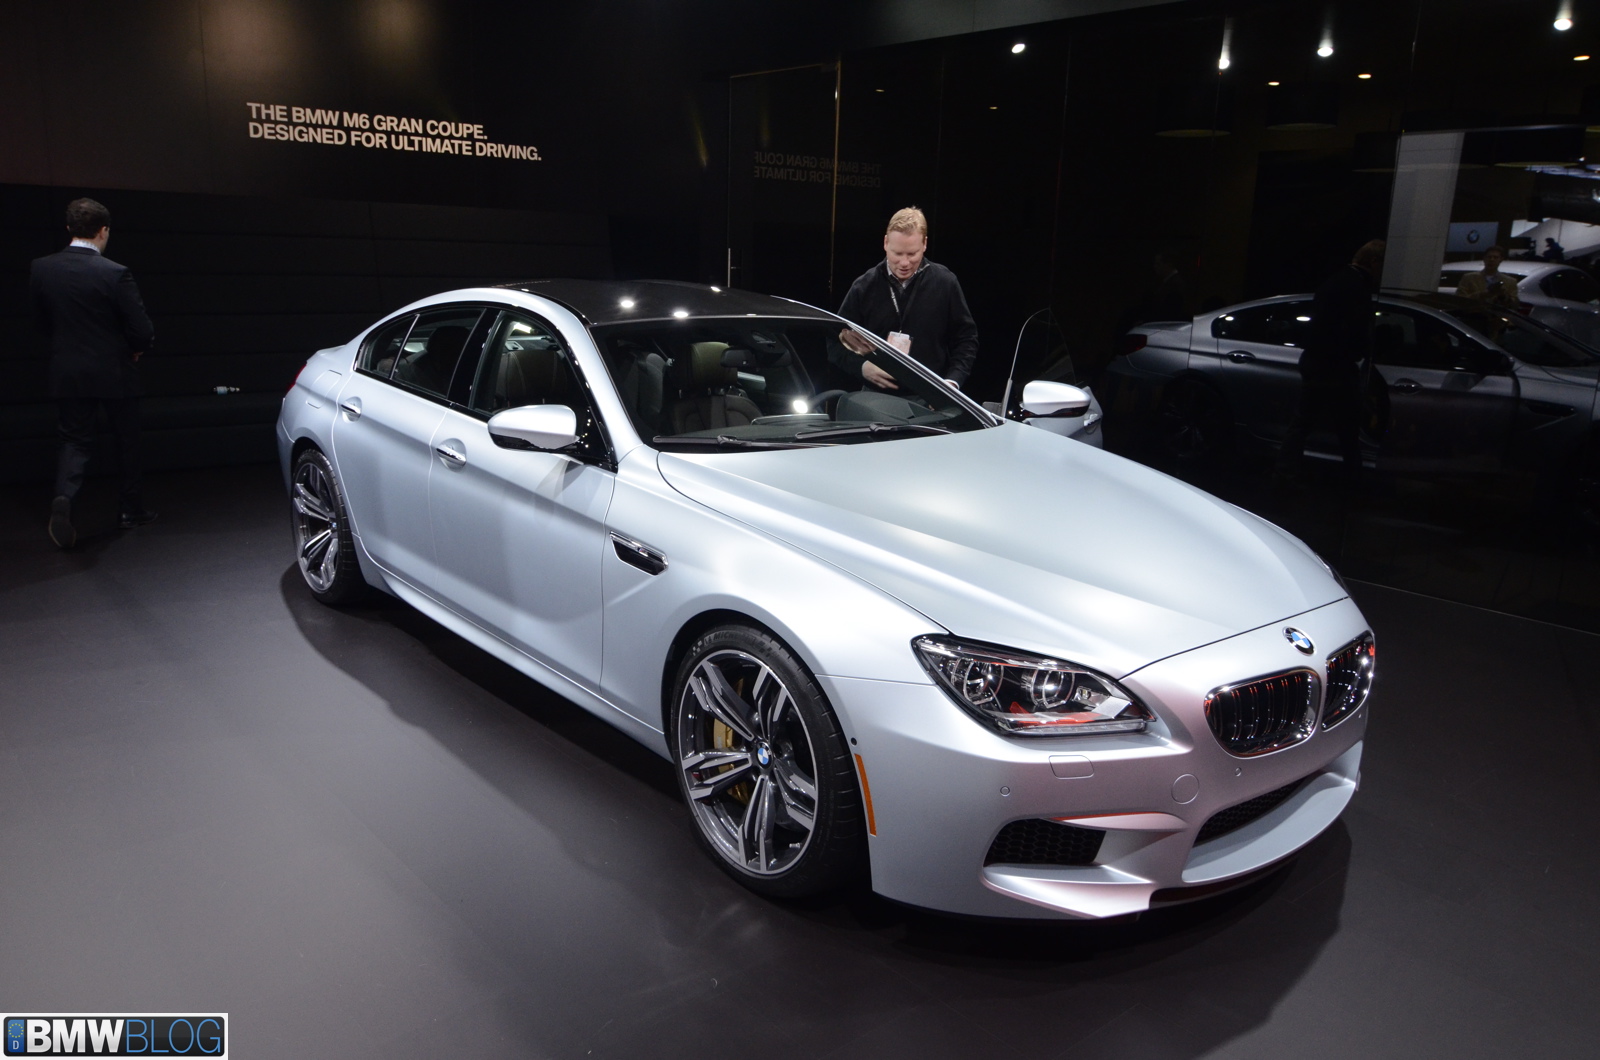 2014-bmw-m6-gran-coupe-25. The show car introduced in Detroit is painted in